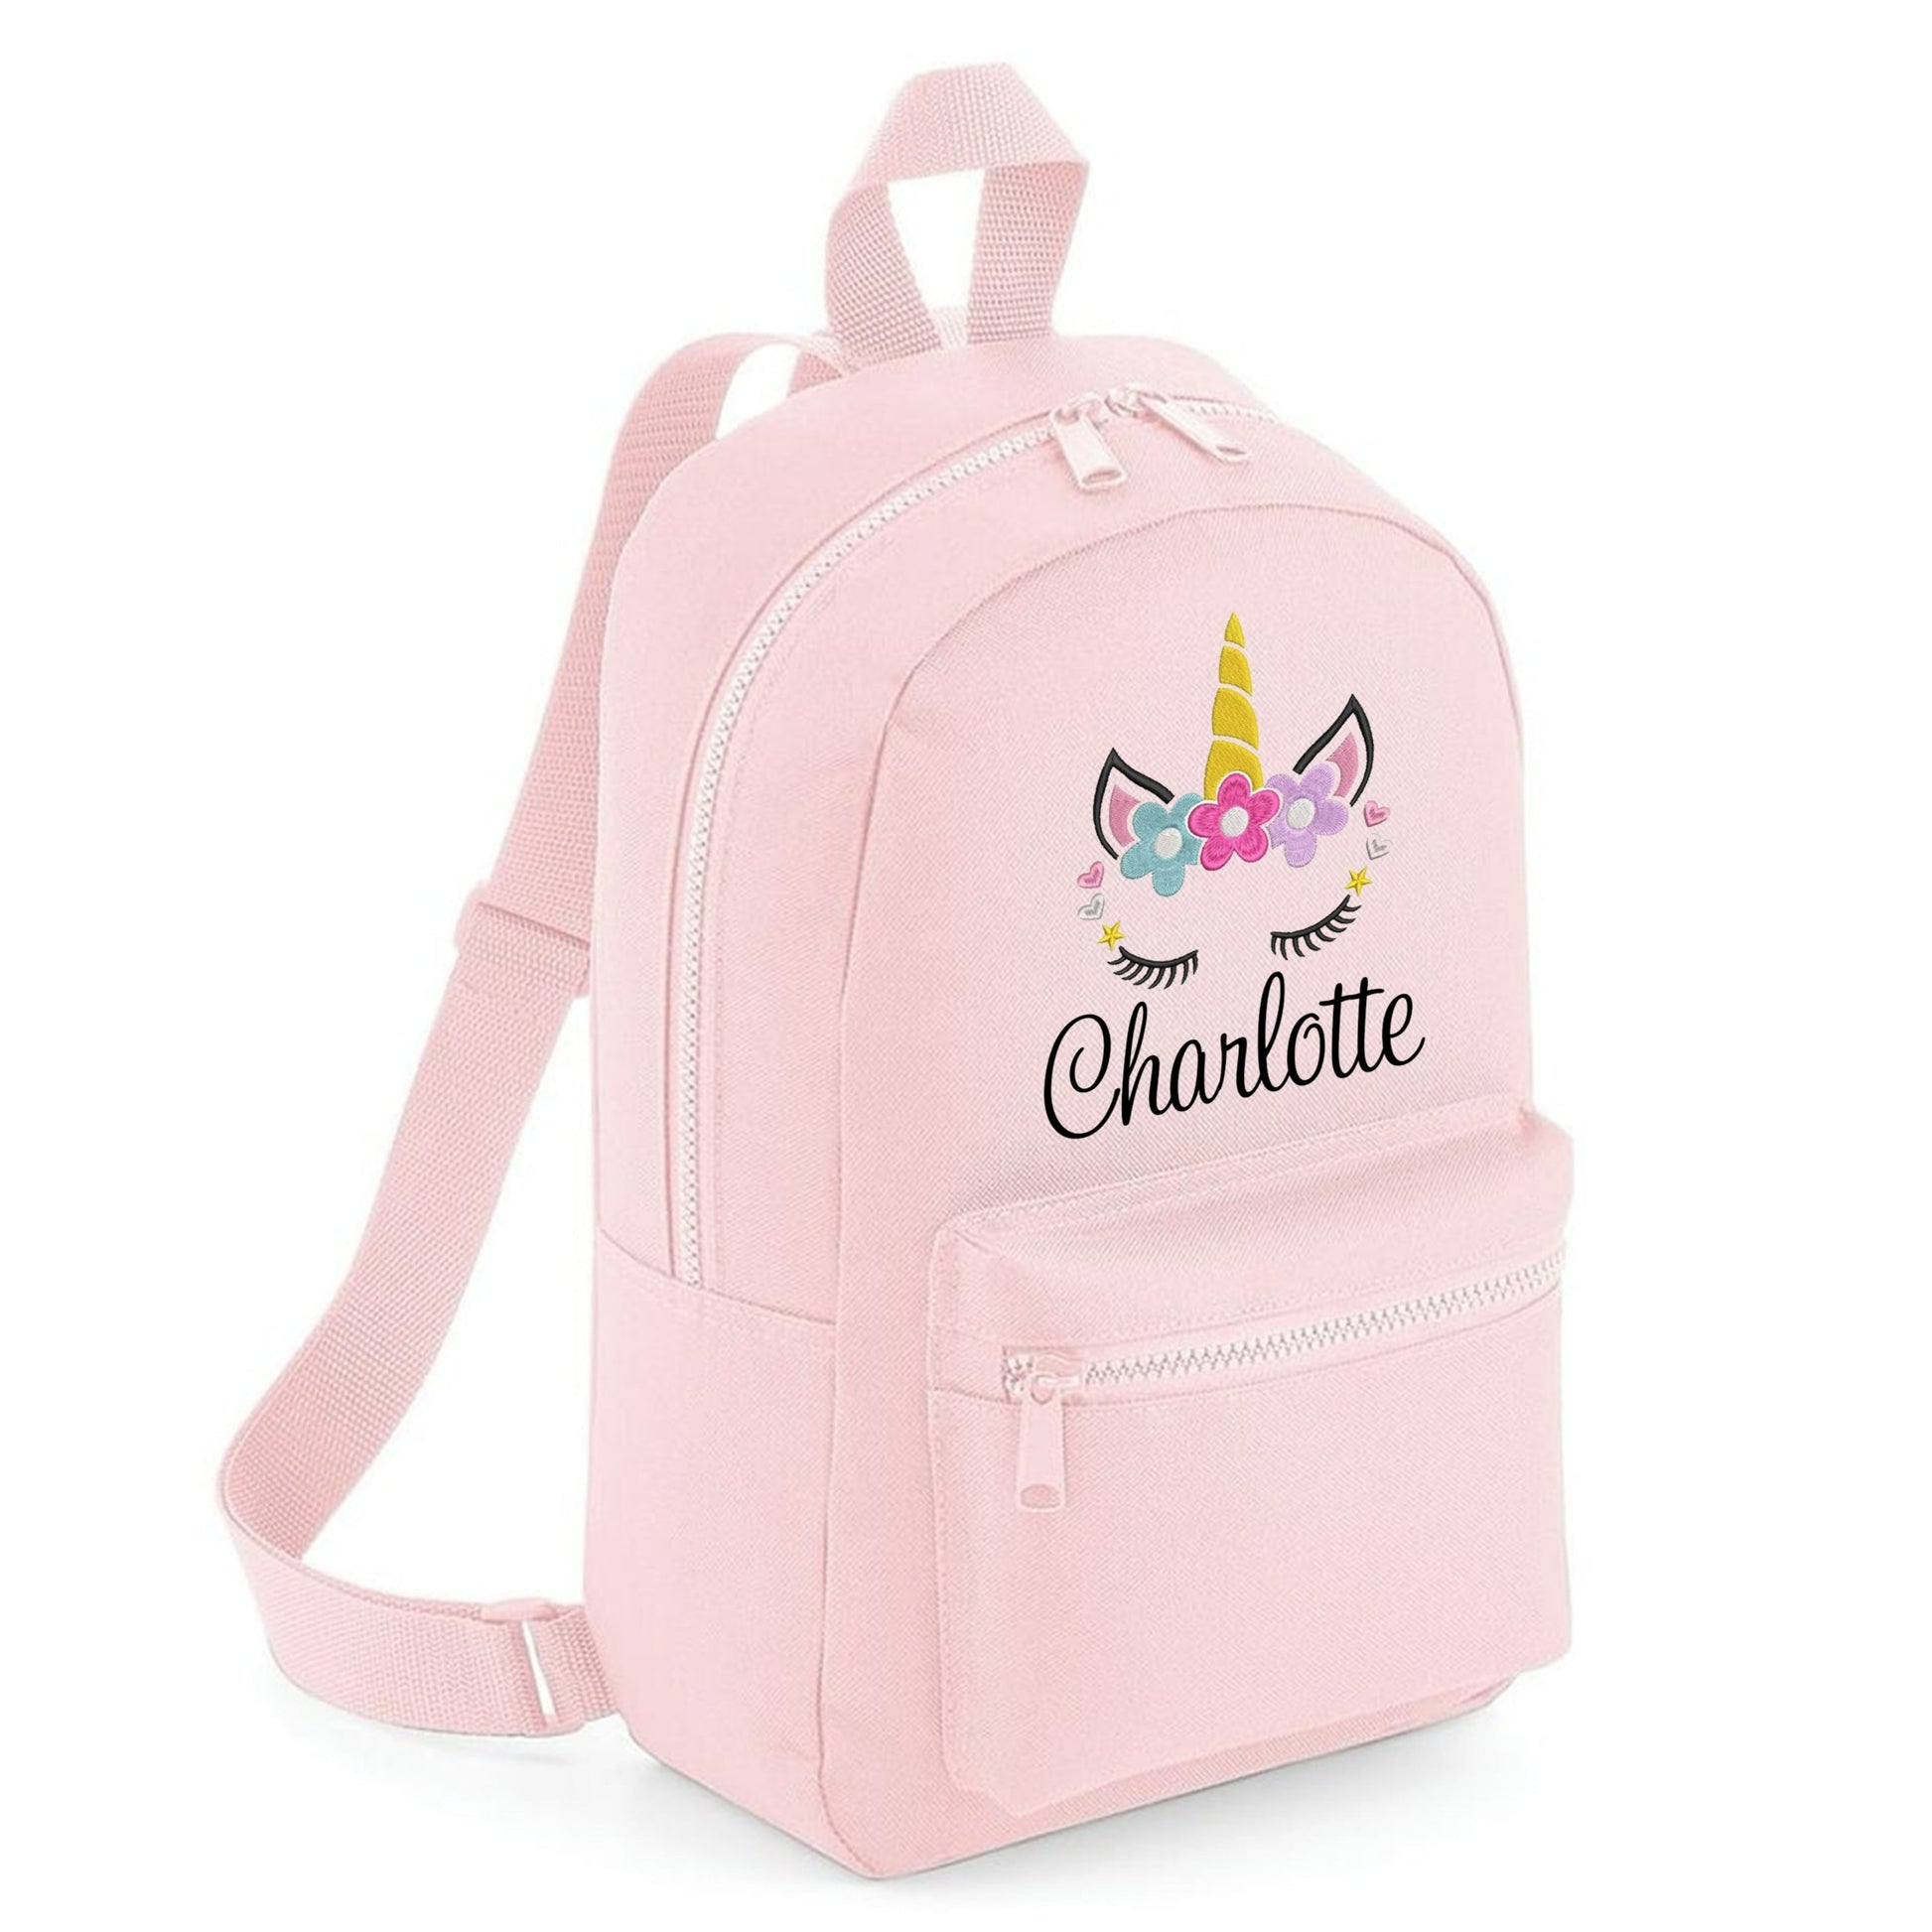 A unicorn embroidered personalsied custom name childrens backpack school bag